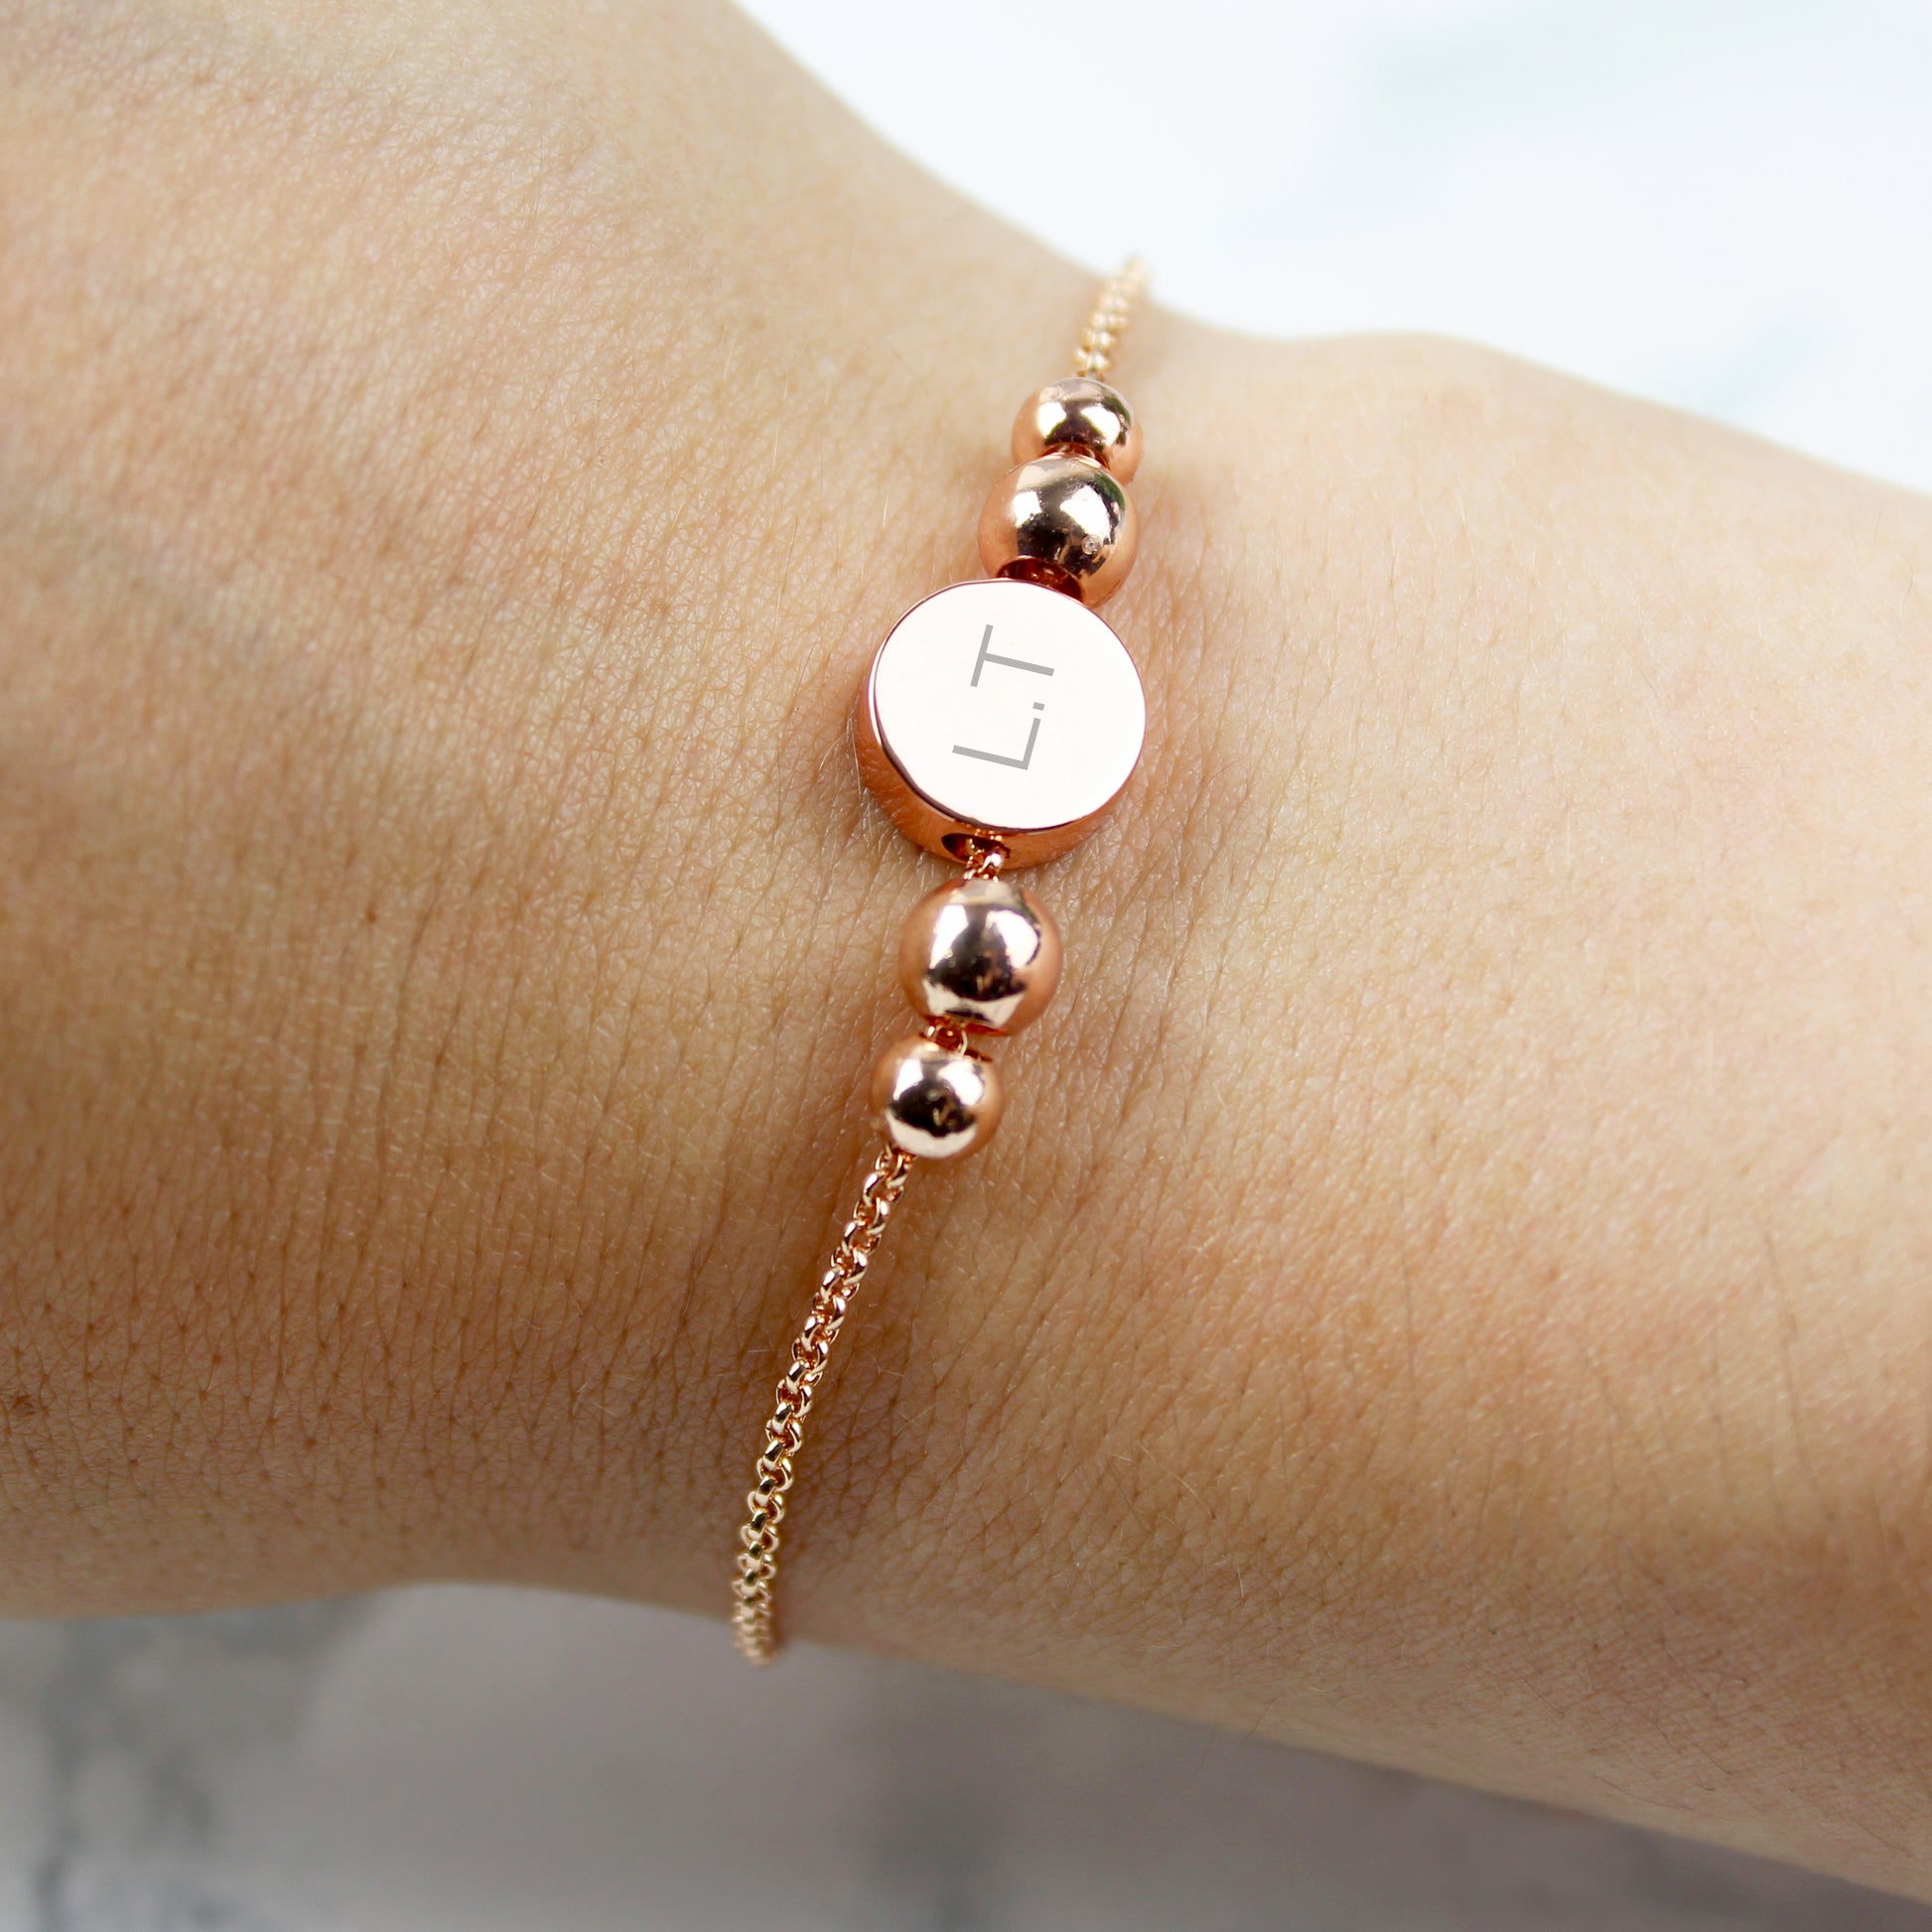 Rose gold tone initials disc bracelet, personalised - Lilybet loves